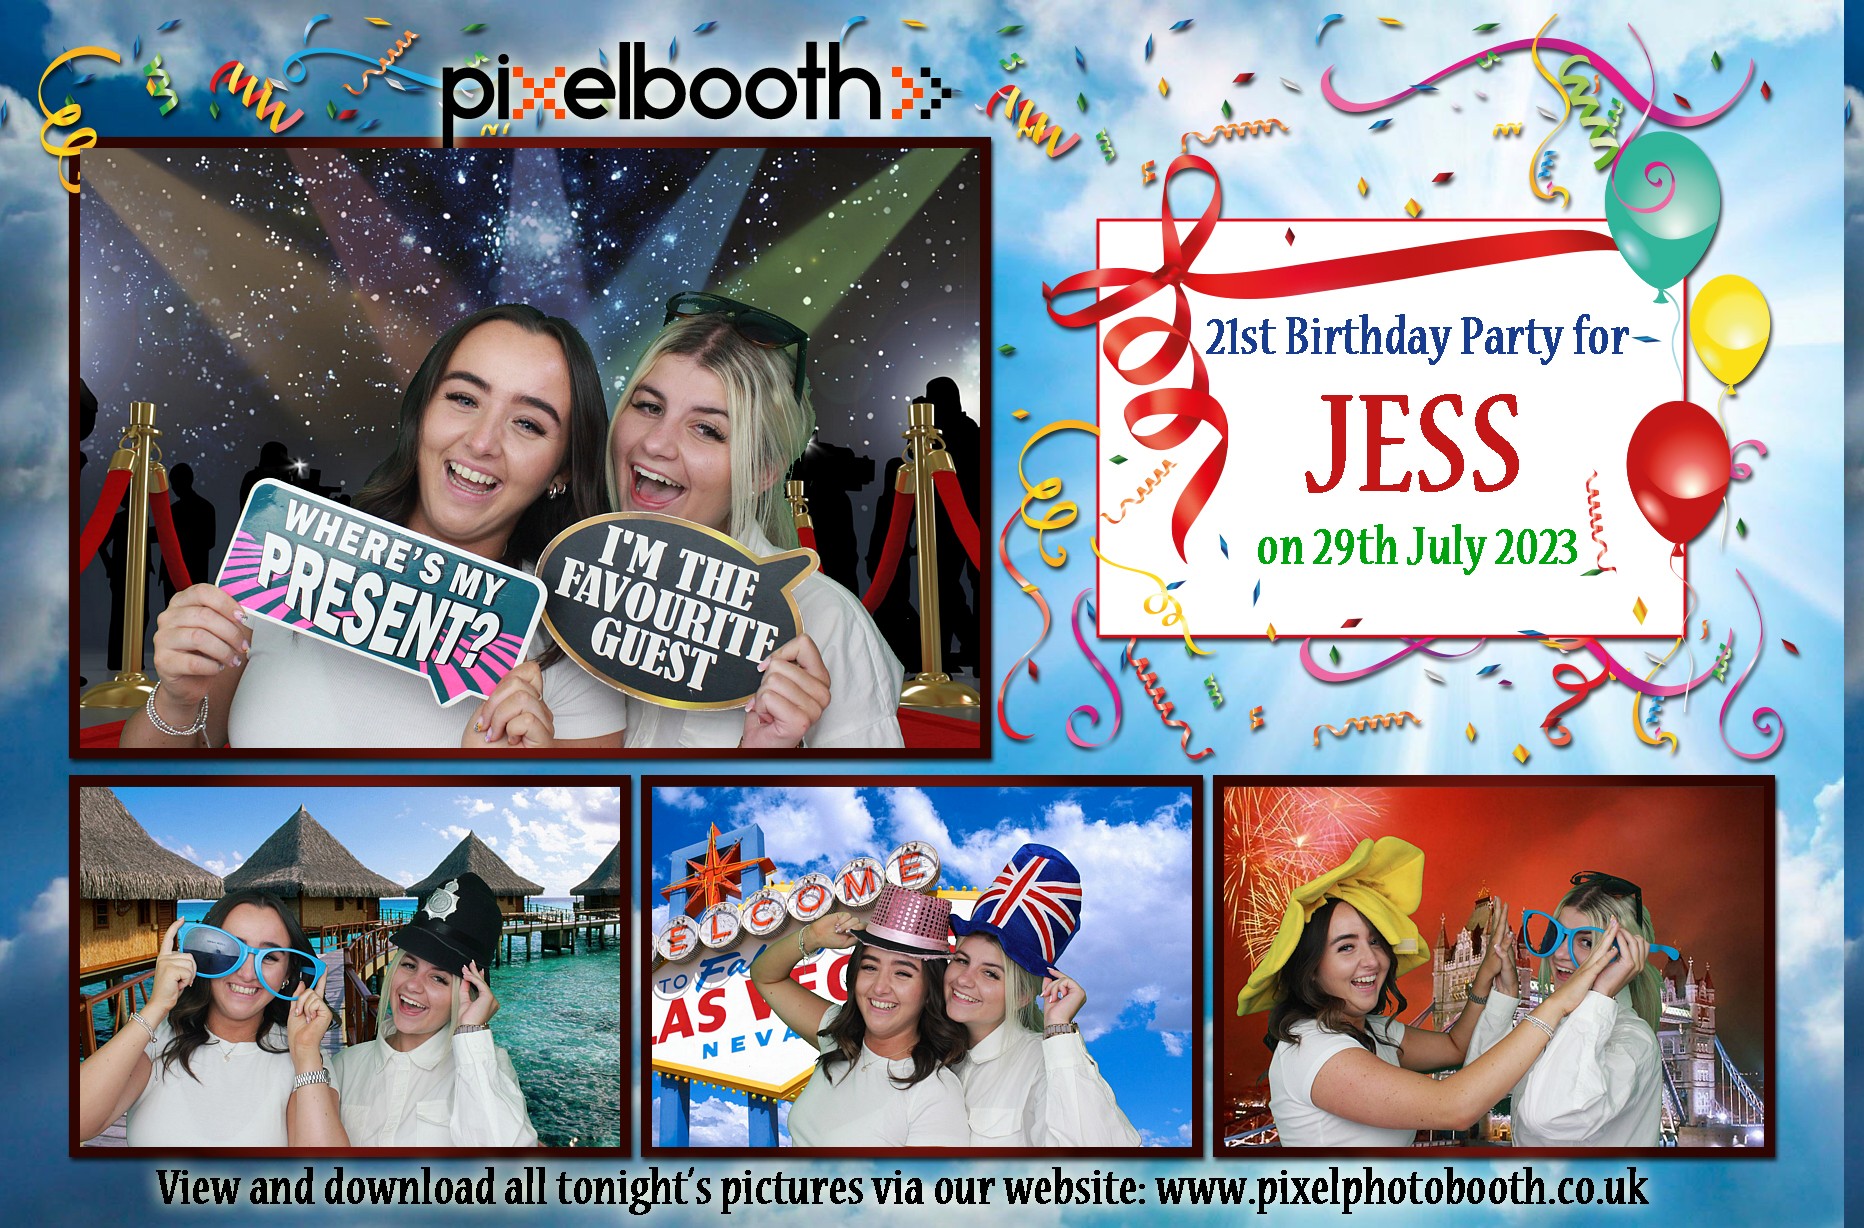 29th July 2023: 21st Birthday Party for Jess